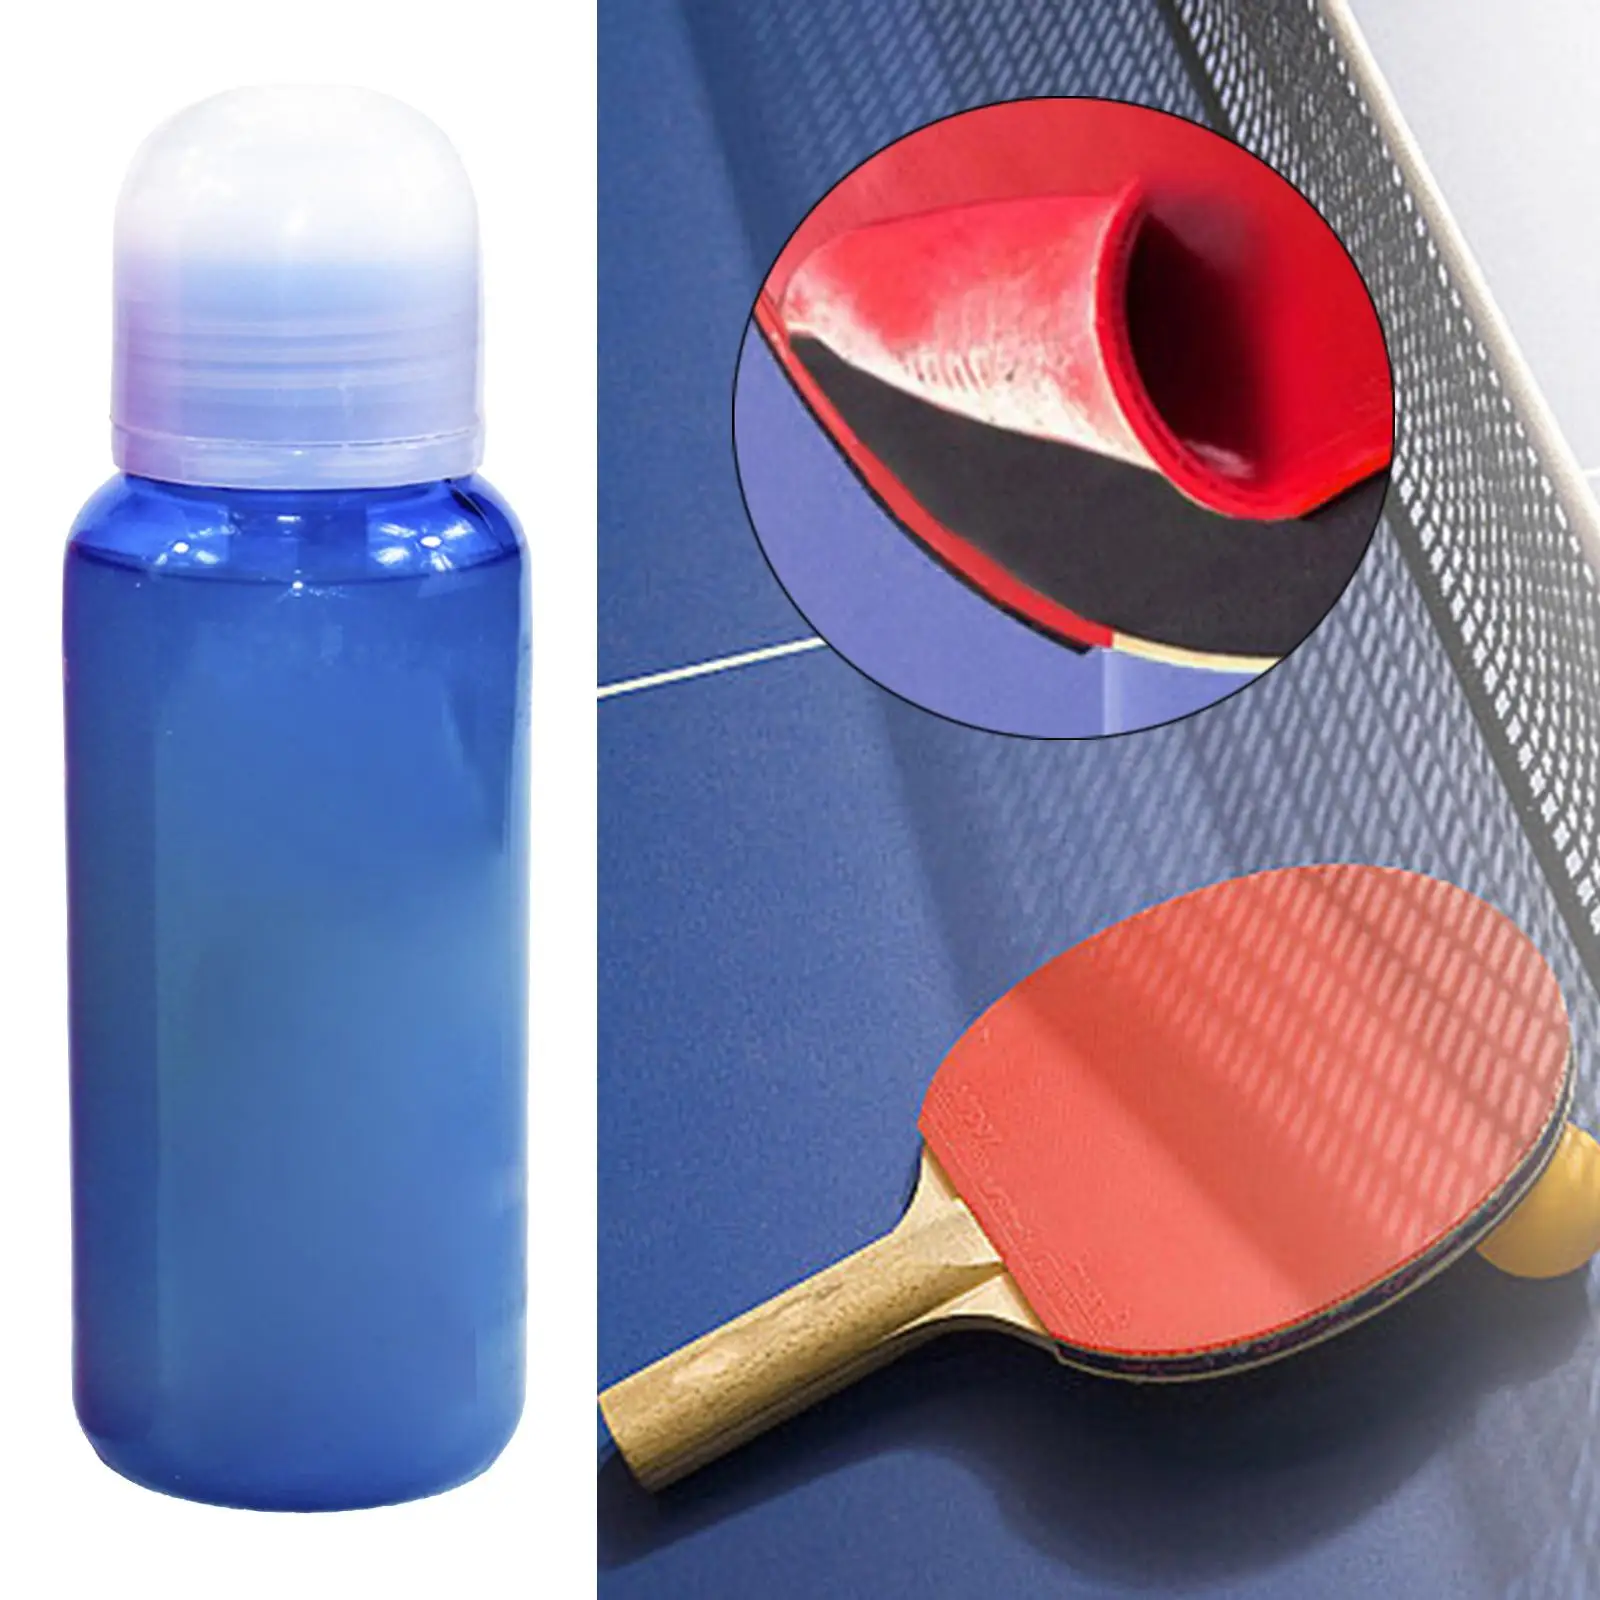 250ml Table Tennis Liquid Glue Professional Durable DIY Pingpong Racket Sturdy Improve Ball Speed Speed Glue with Built-in Brush